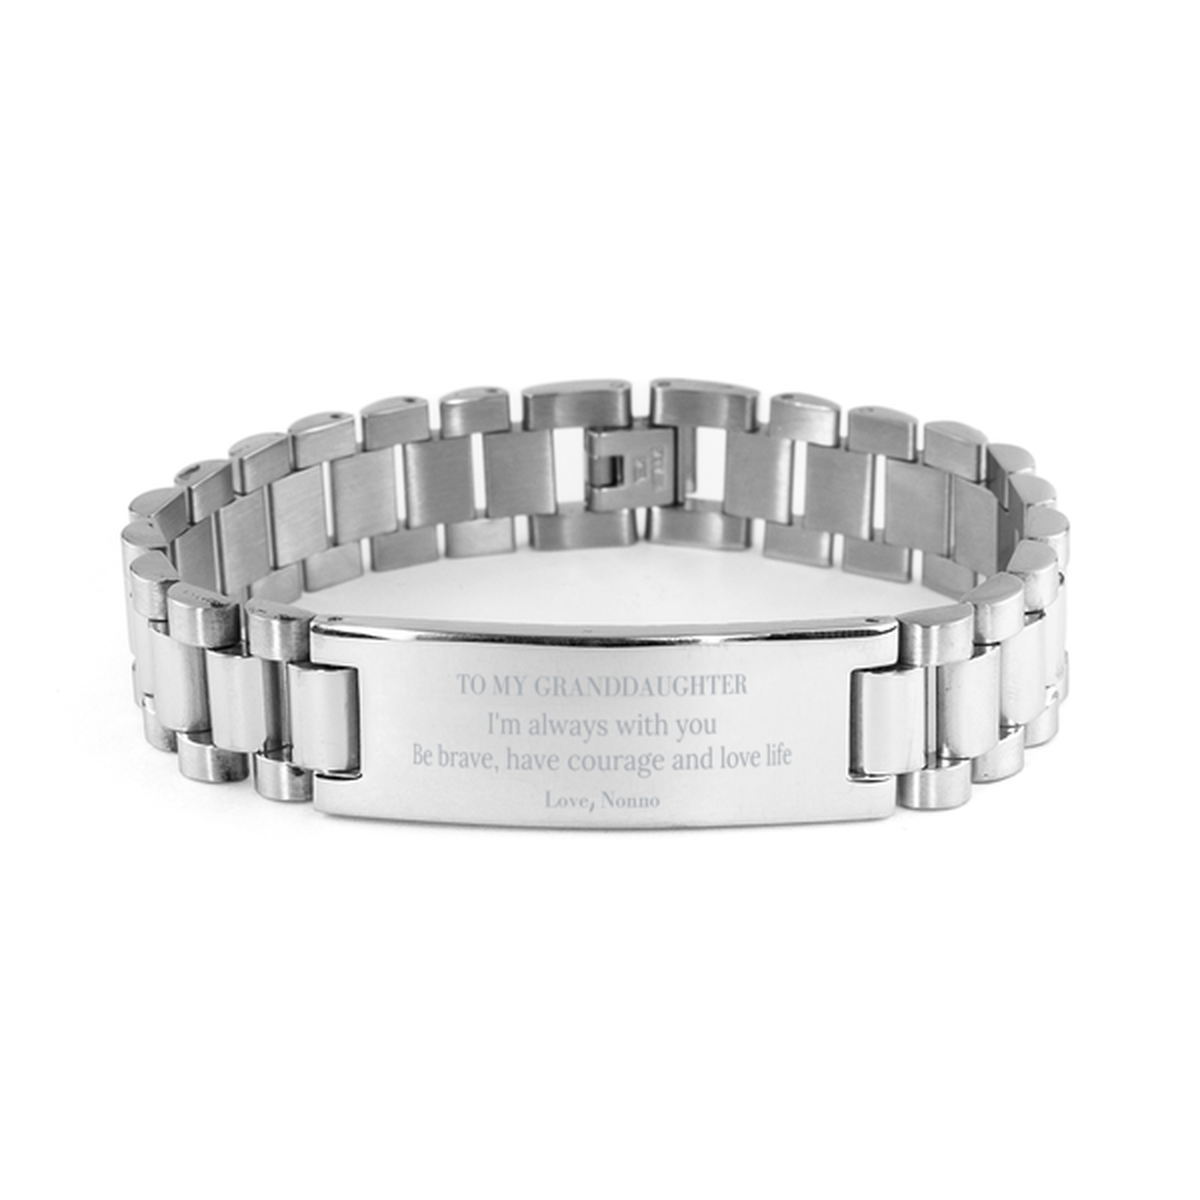 To My Granddaughter Gifts from Nonno, Unique Ladder Stainless Steel Bracelet Inspirational Christmas Birthday Graduation Gifts for Granddaughter I'm always with you. Be brave, have courage and love life. Love, Nonno